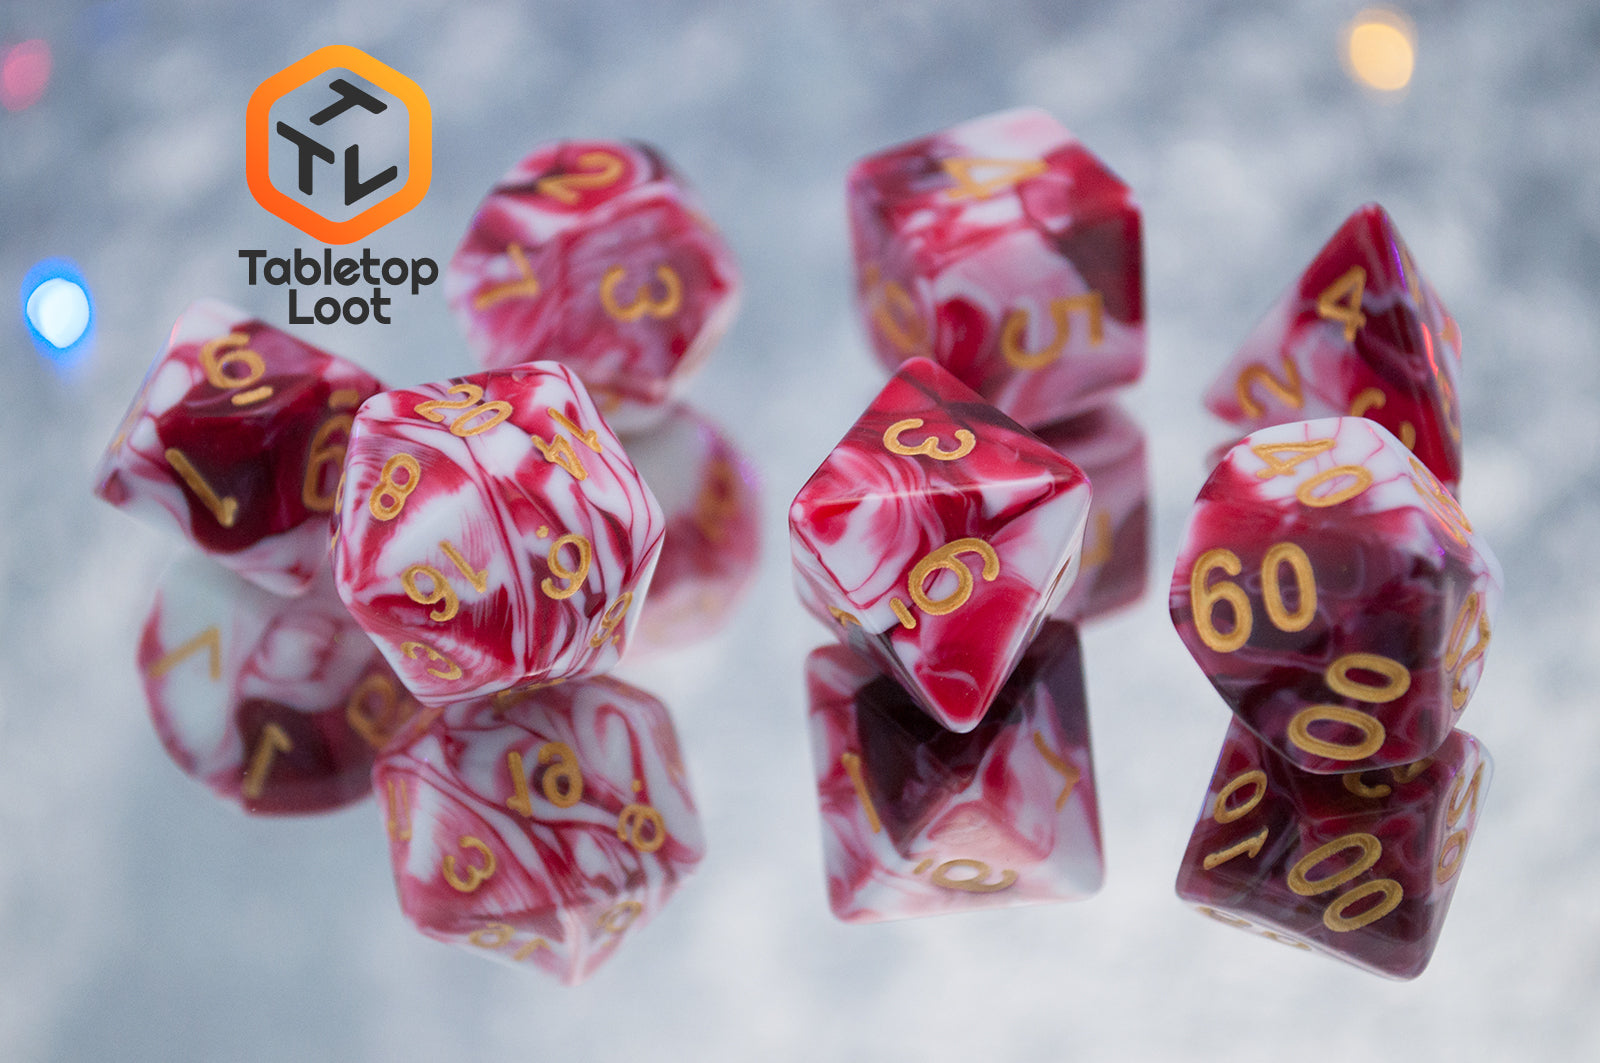 The Strawberry Sundae 7 piece dice set from Tabletop Loot with swirls of red, pink, and white and gold ink.